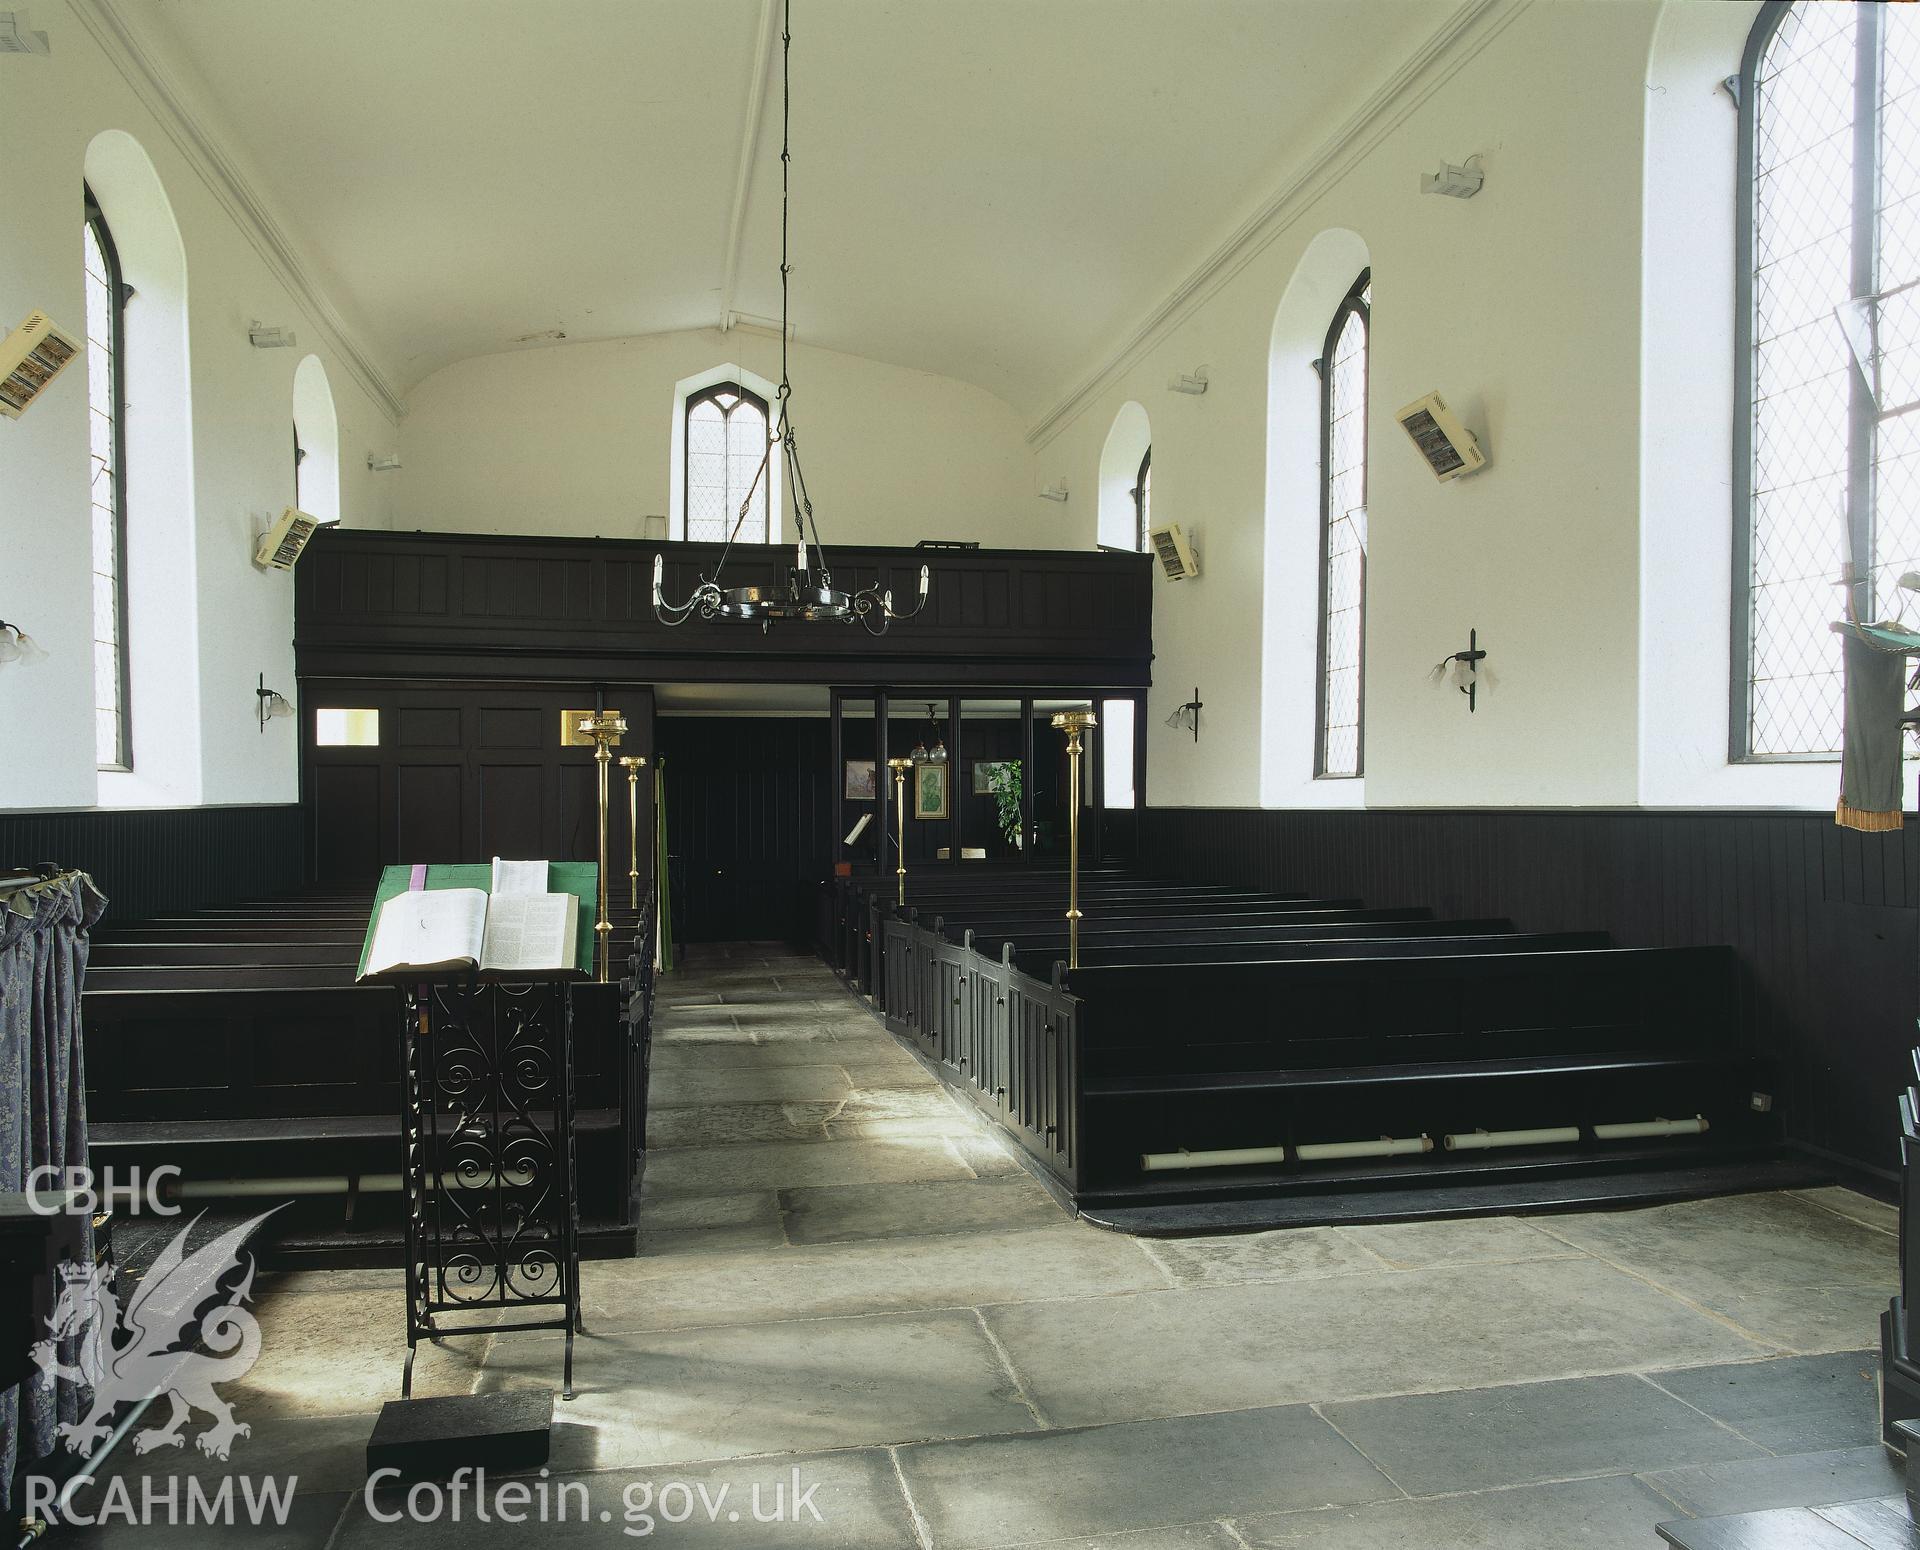 RCAHMW colour transparency showing an interior view of St Michael's Church, Eglwysfach